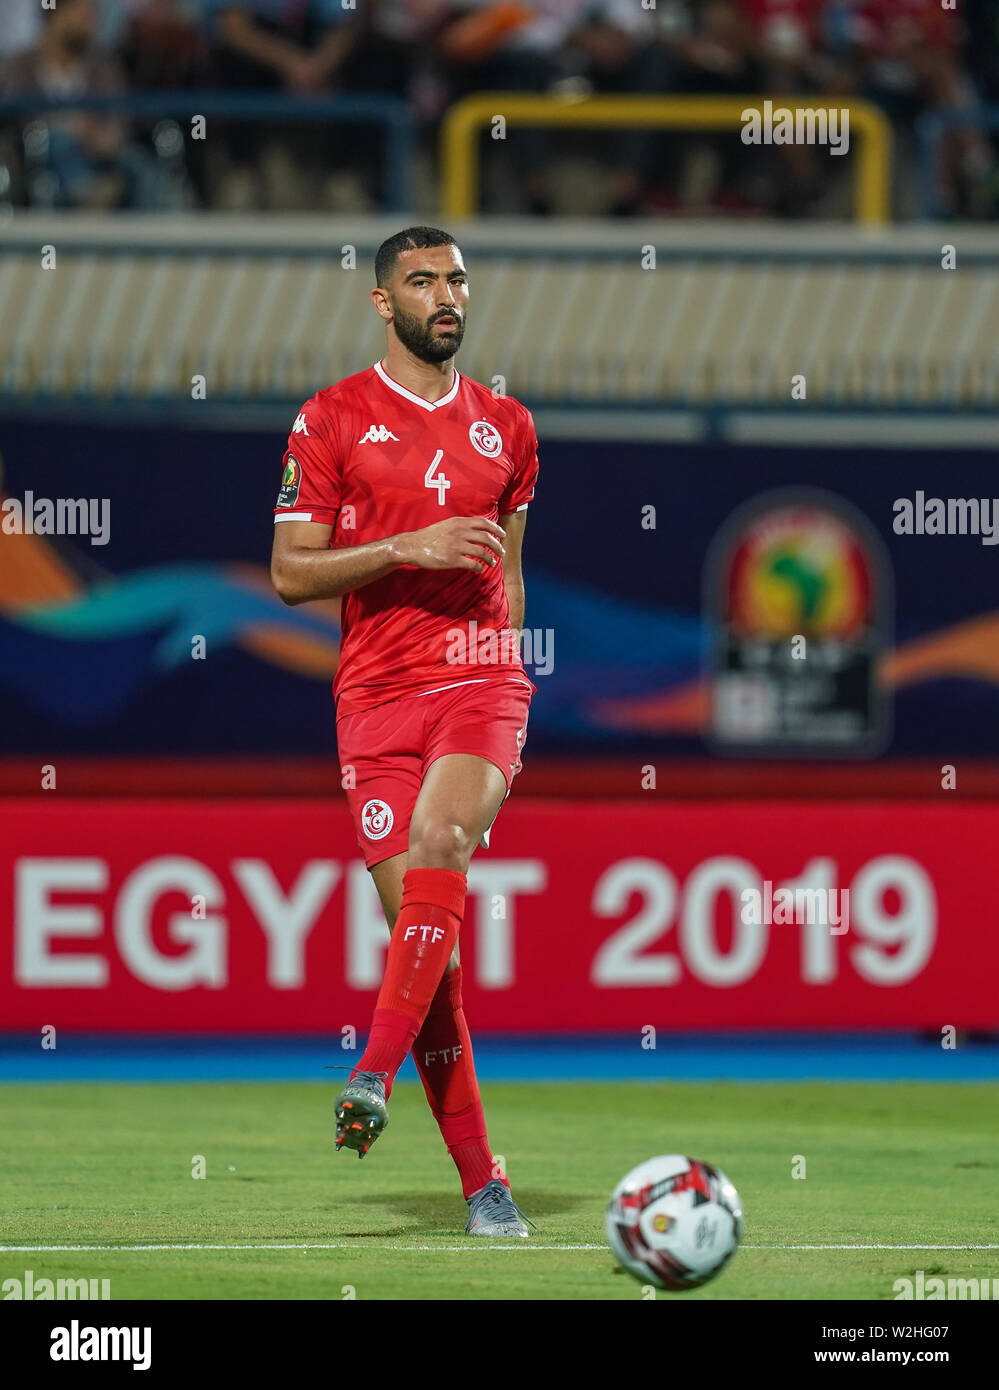 FRANCE OUT July 8, 2019: Yassine Meriah of Tunisia during the 2019 African Cup of Nations match between Ghana and Tunisia at the Ismailia Stadium in Ismailia, Egypt. Ulrik Pedersen/CSM. Stock Photo